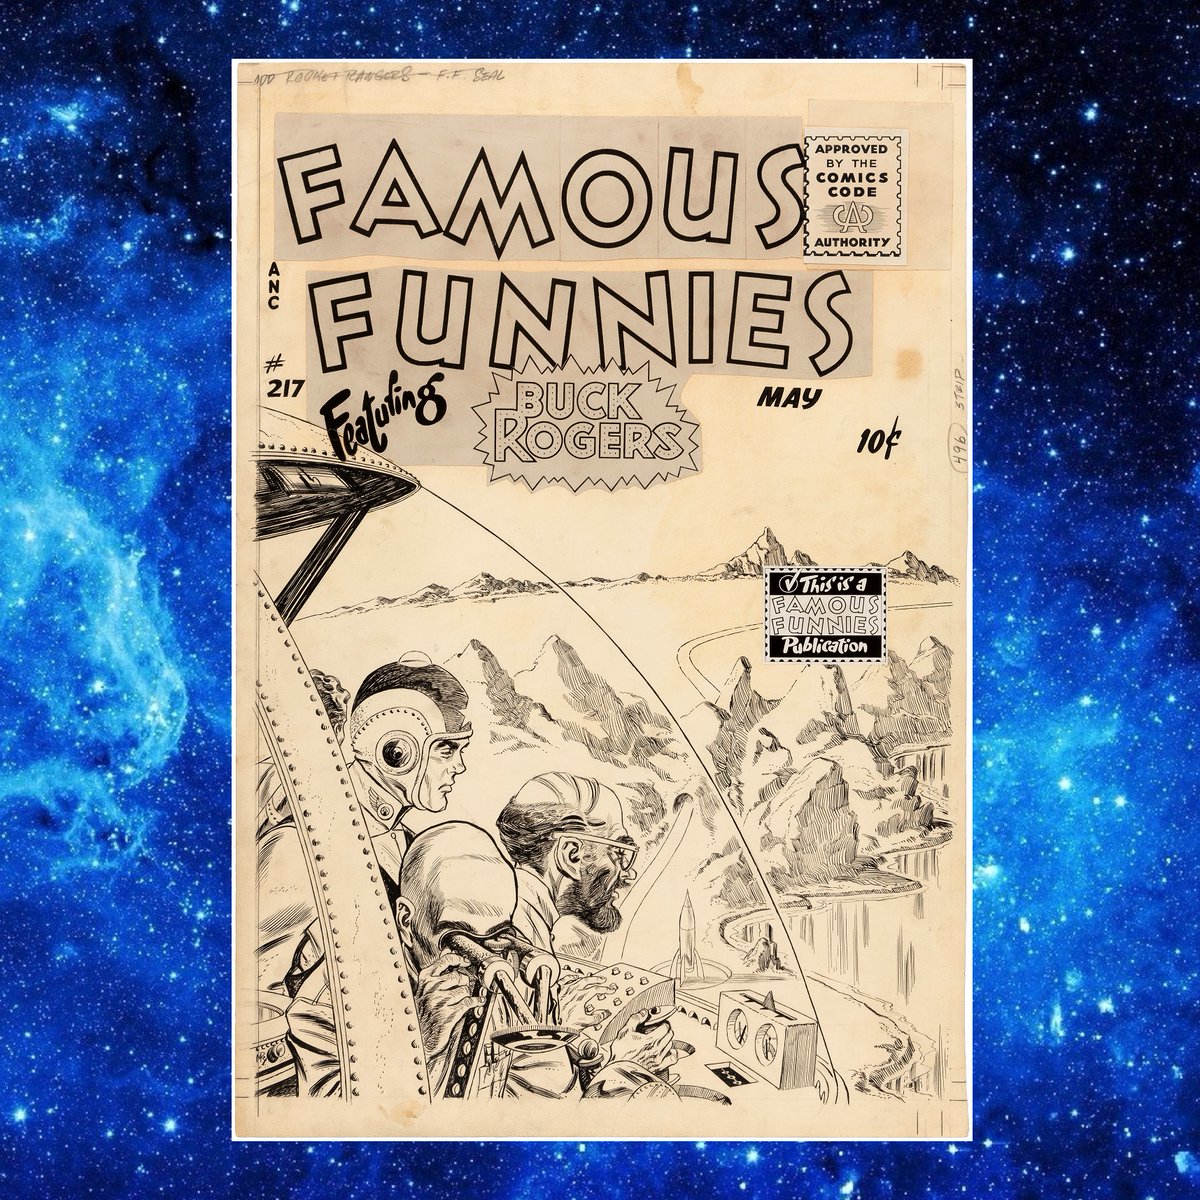 SOLD FOR $26,710! #ComicArtFans! Did you see what this #coverart for #FamousFunnies #217 sold for at @HakesAuctions? Illustrated by #MikeRoy, this was the last issue to feature a #BuckRogers cover. Contact Hake's to sell your #comicart! 🚀🎨🚀 #comicbooks #comics #collector